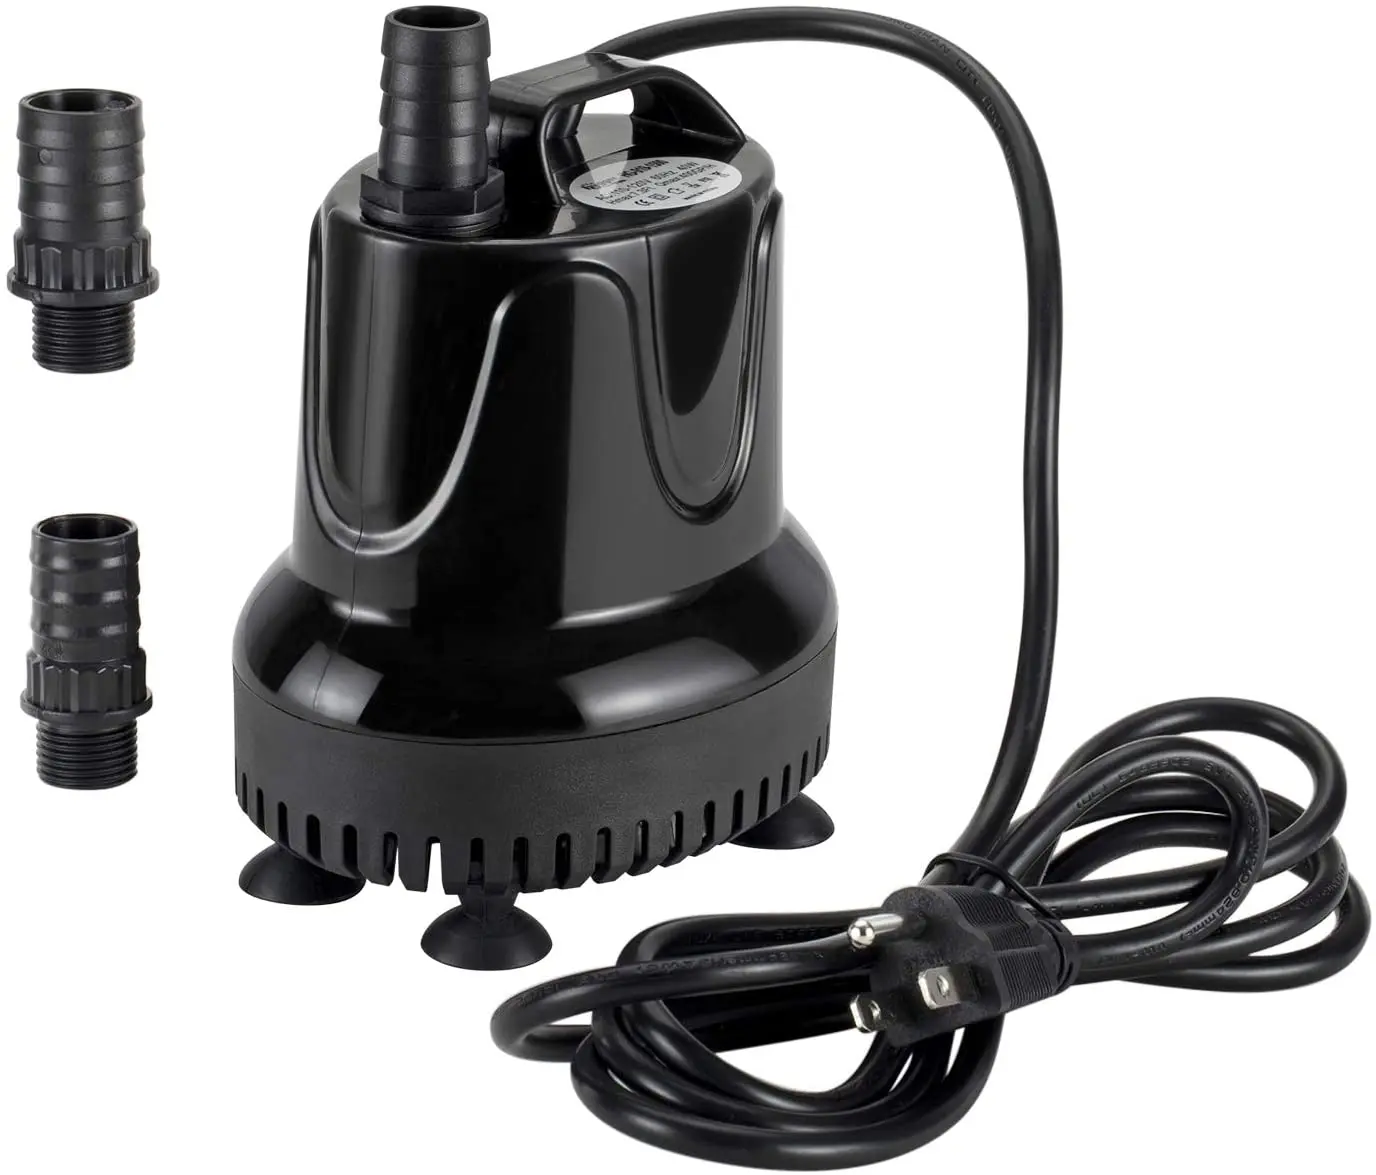 

Hygger Submersible Water Pump 18W 40W 60W 90W Fountain Pond Aquarium Fish Tank Pump with Power Cord, 3 Nozzles